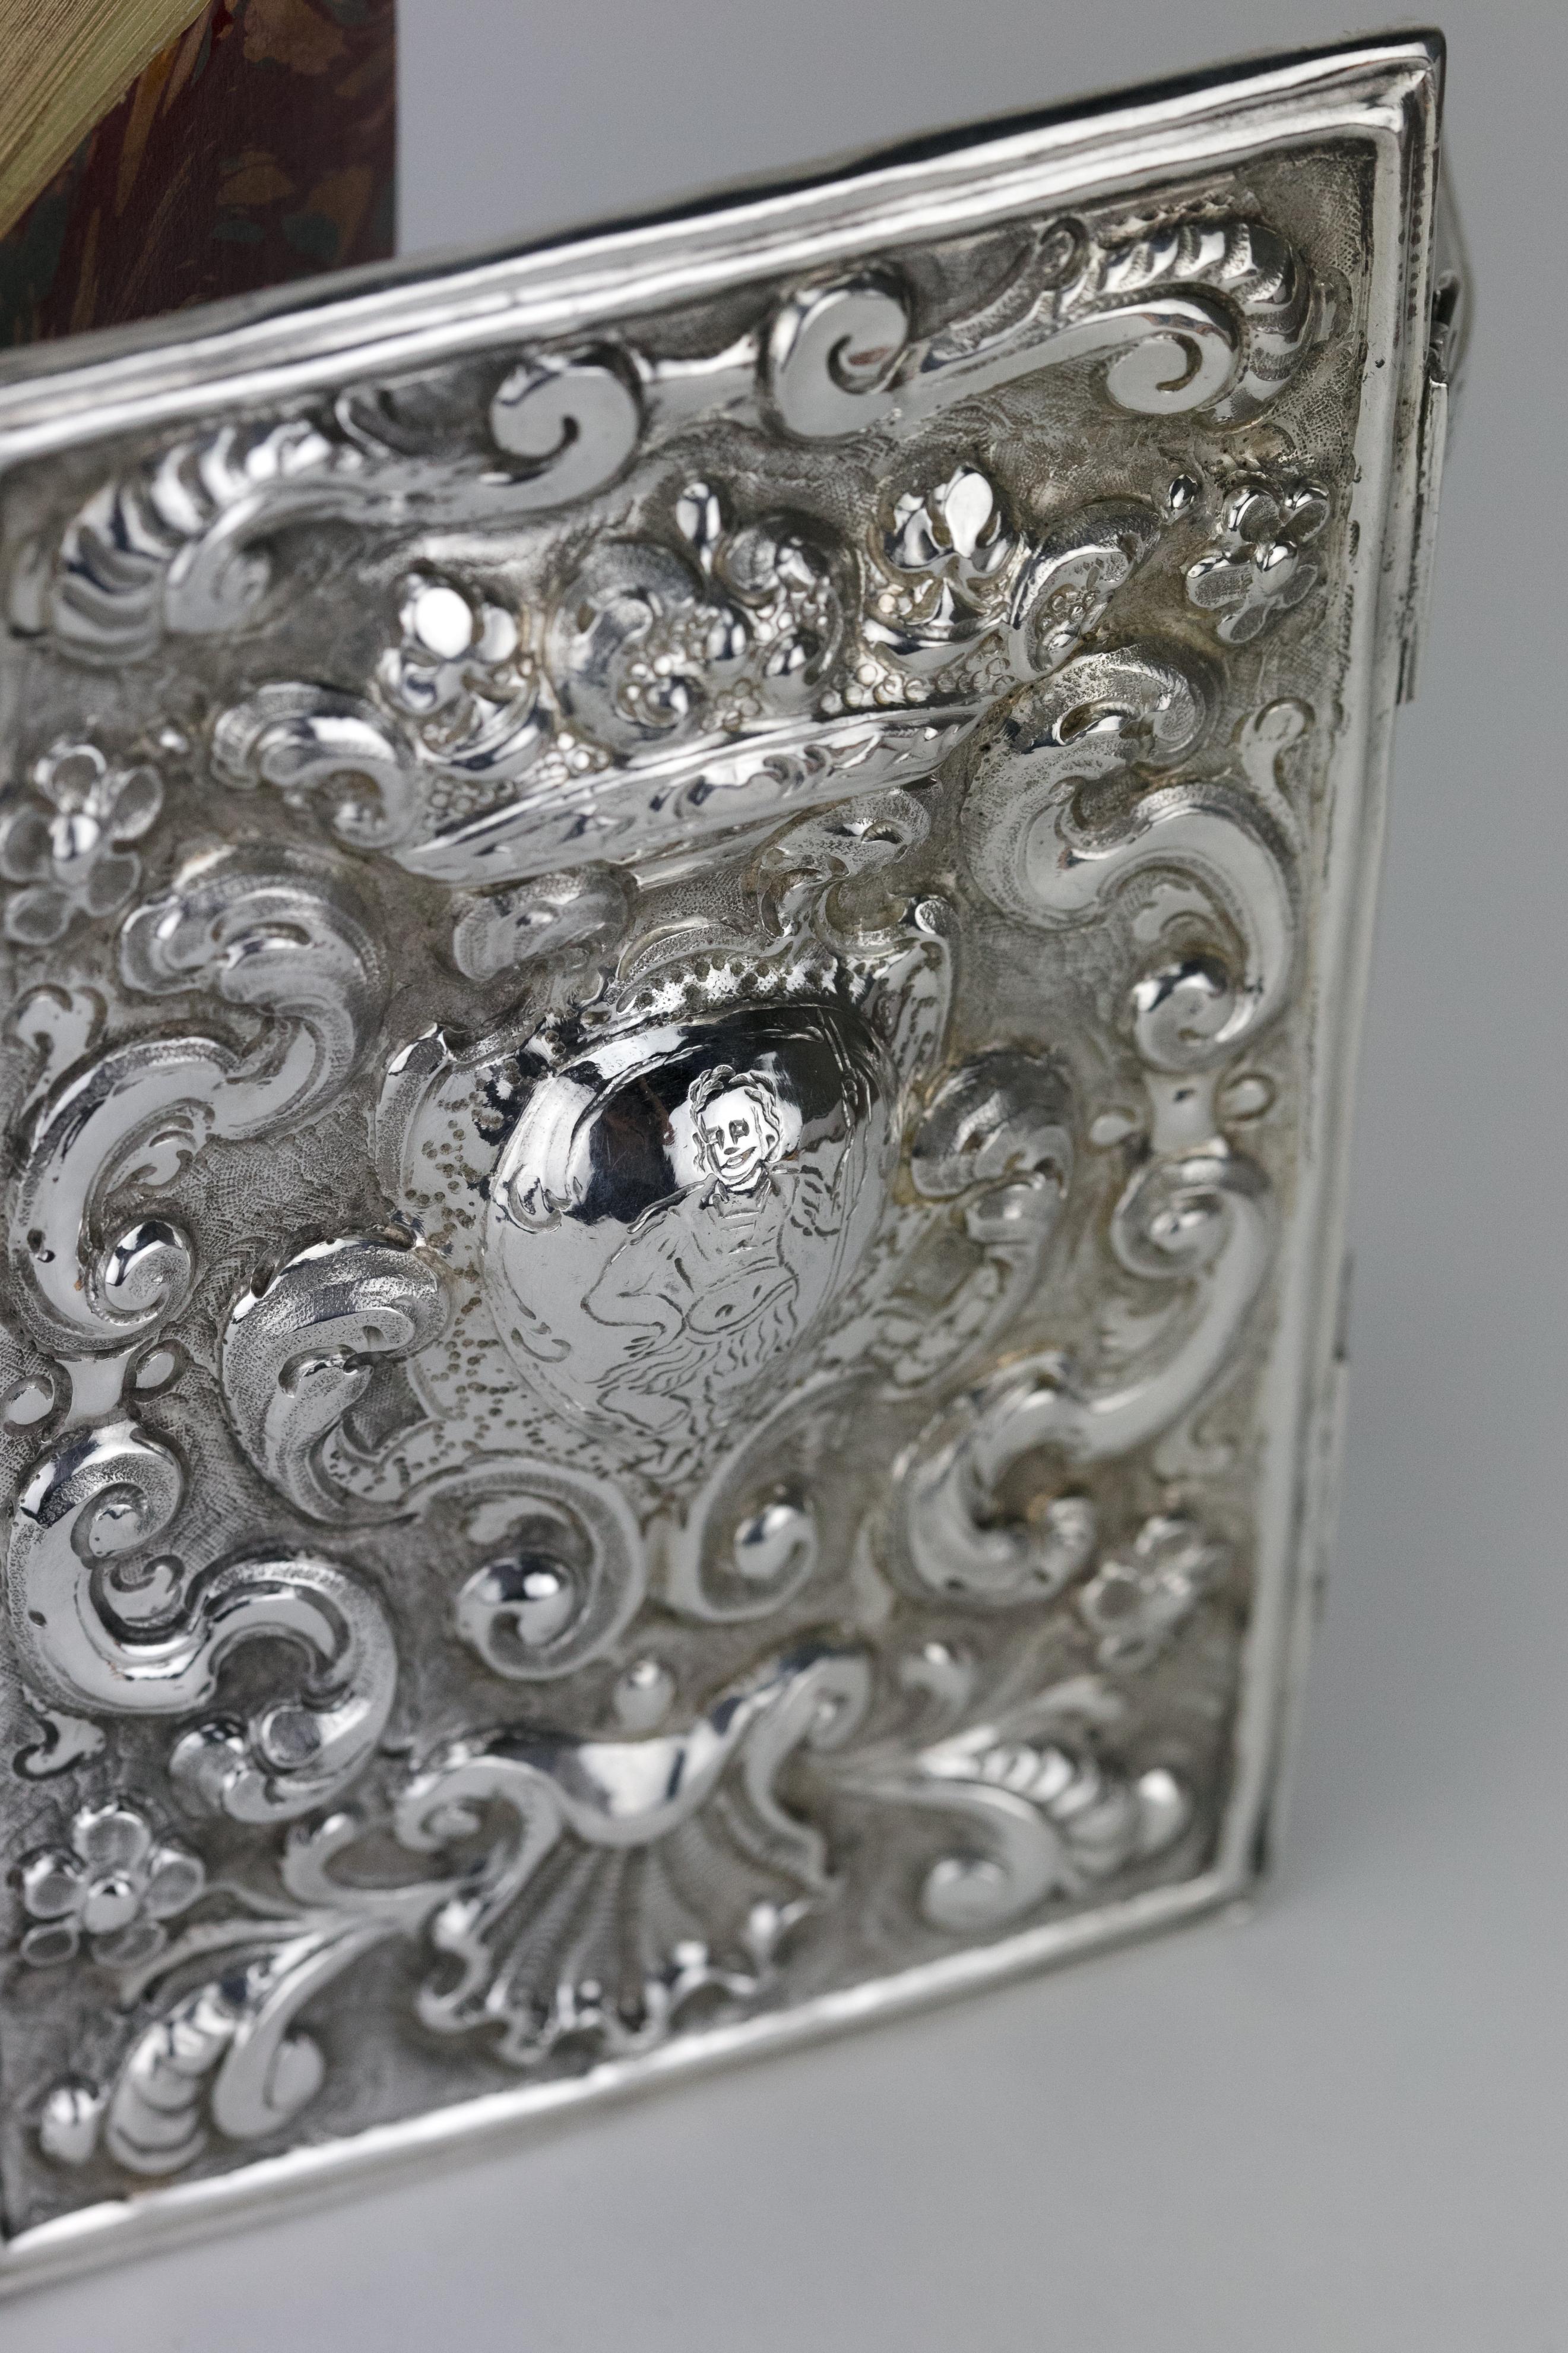 Repoussé Early 18th Century Italian Silver Book Binding For Sale